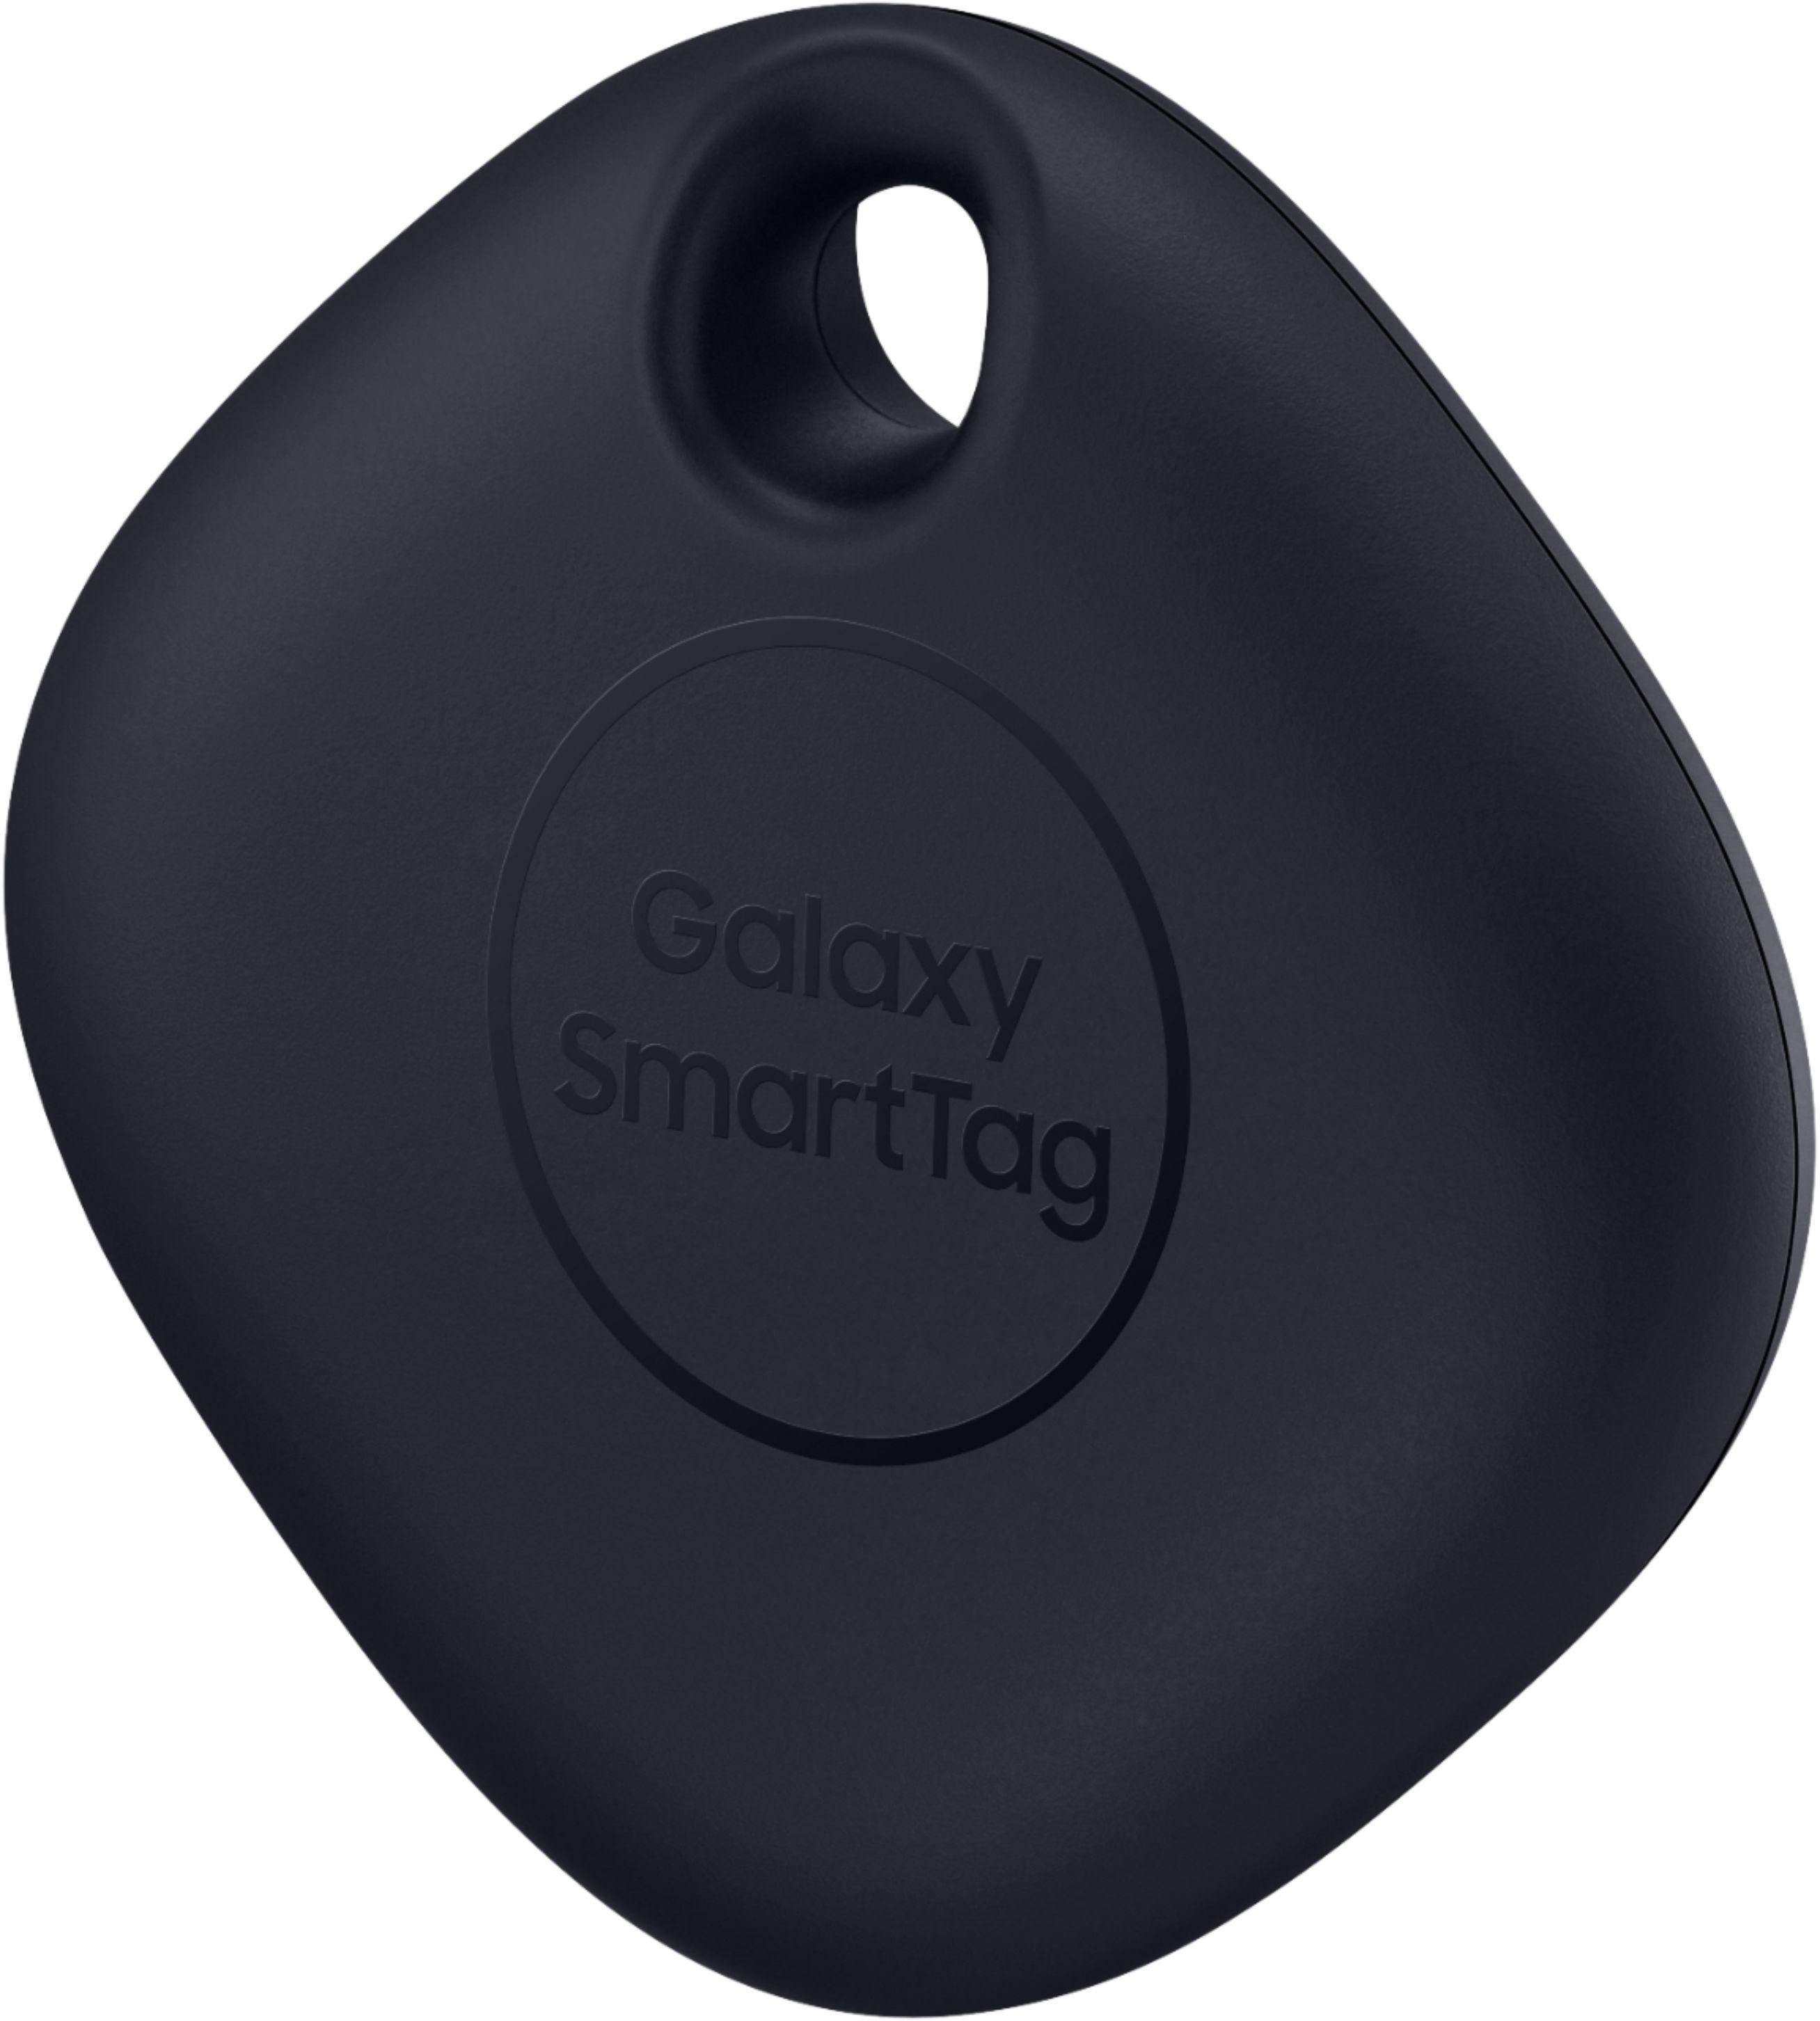 airtag samsung - Buy airtag samsung with free shipping on AliExpress